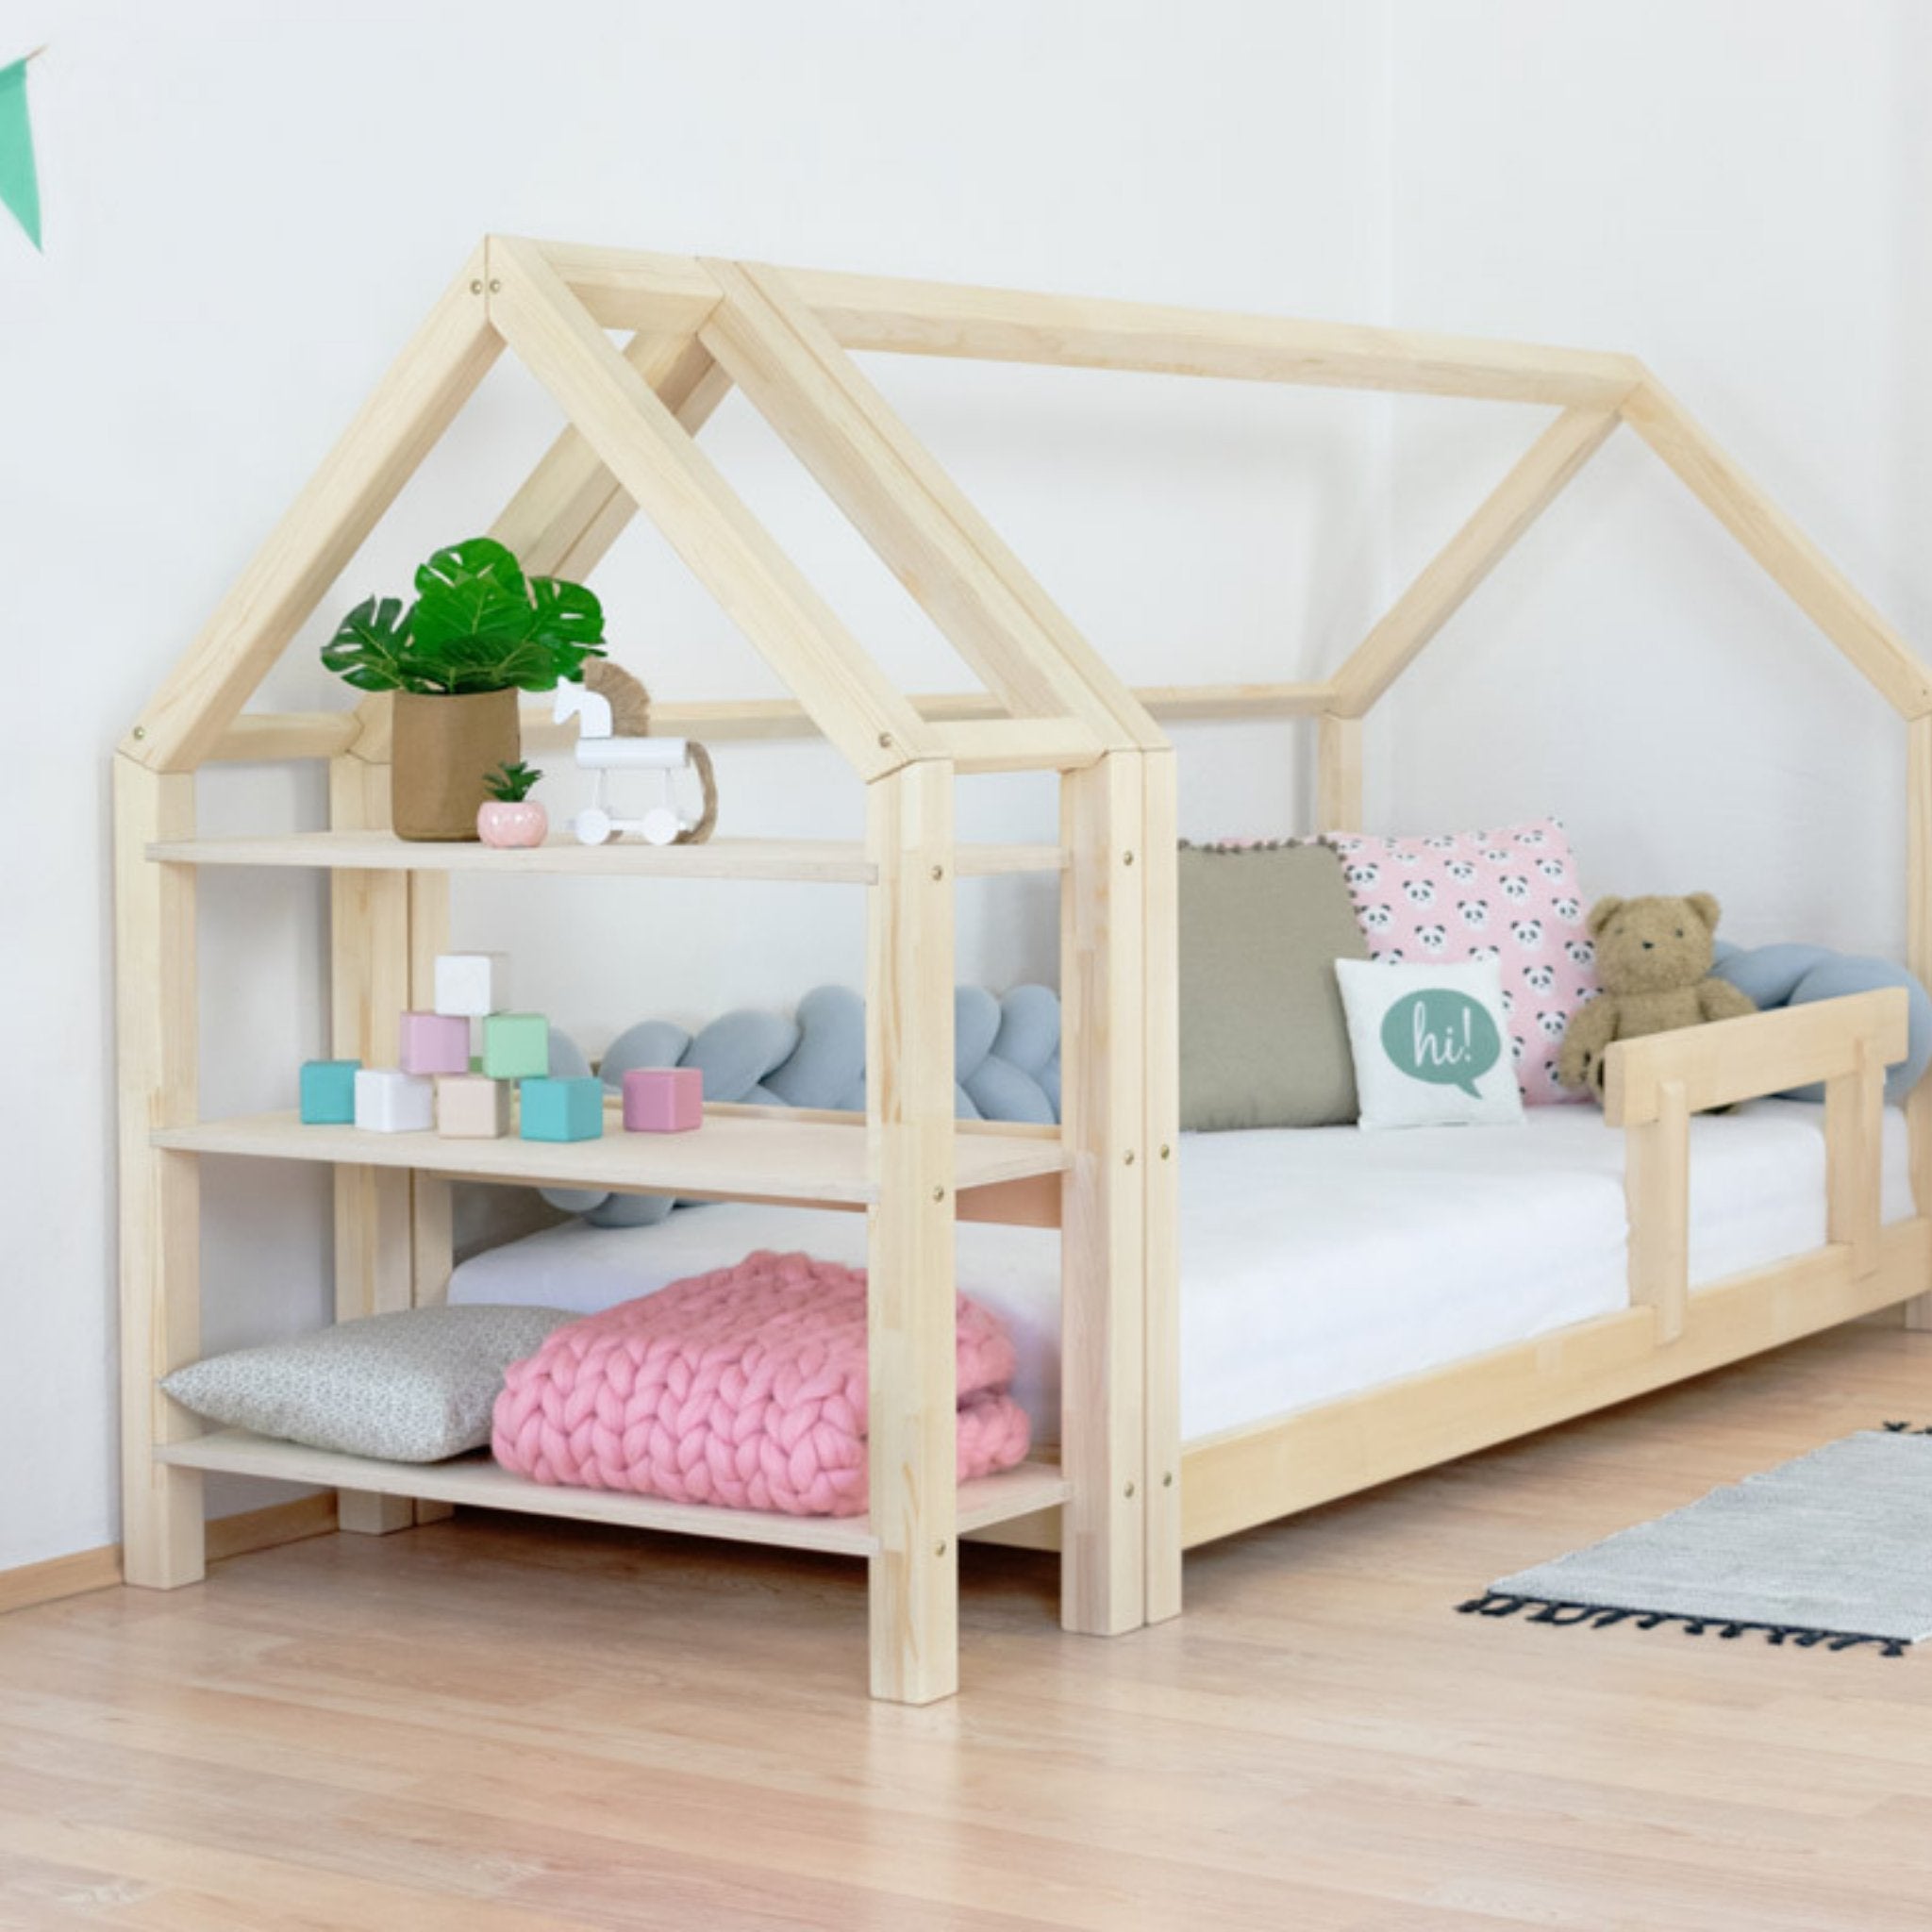 Wooden House Bed and Shelf: TERY + KTERY - Natural